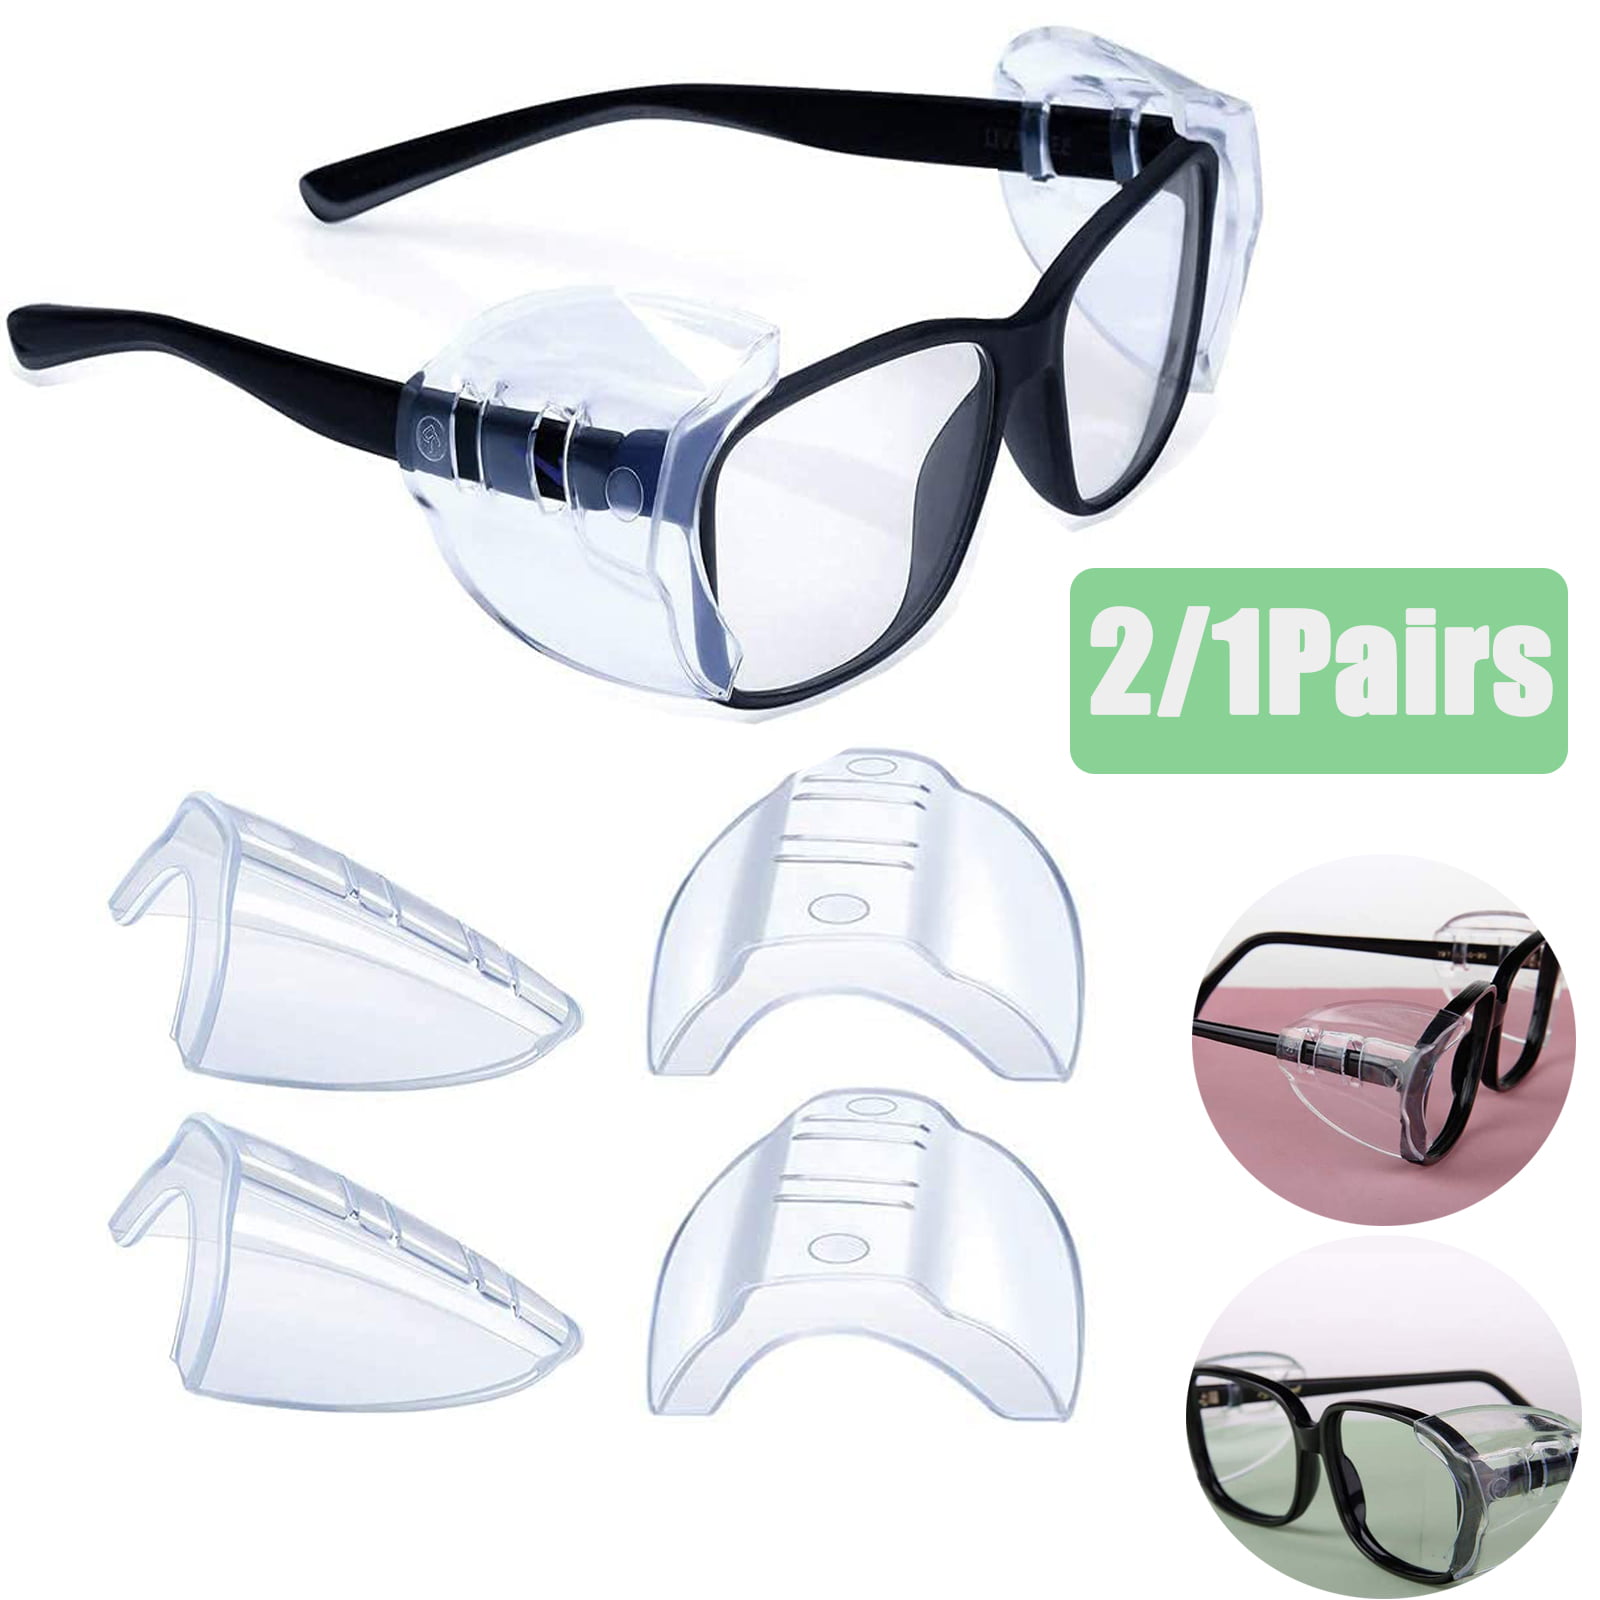 2x clear universal flexible side shields safety glasses goggles eye protects  SE 